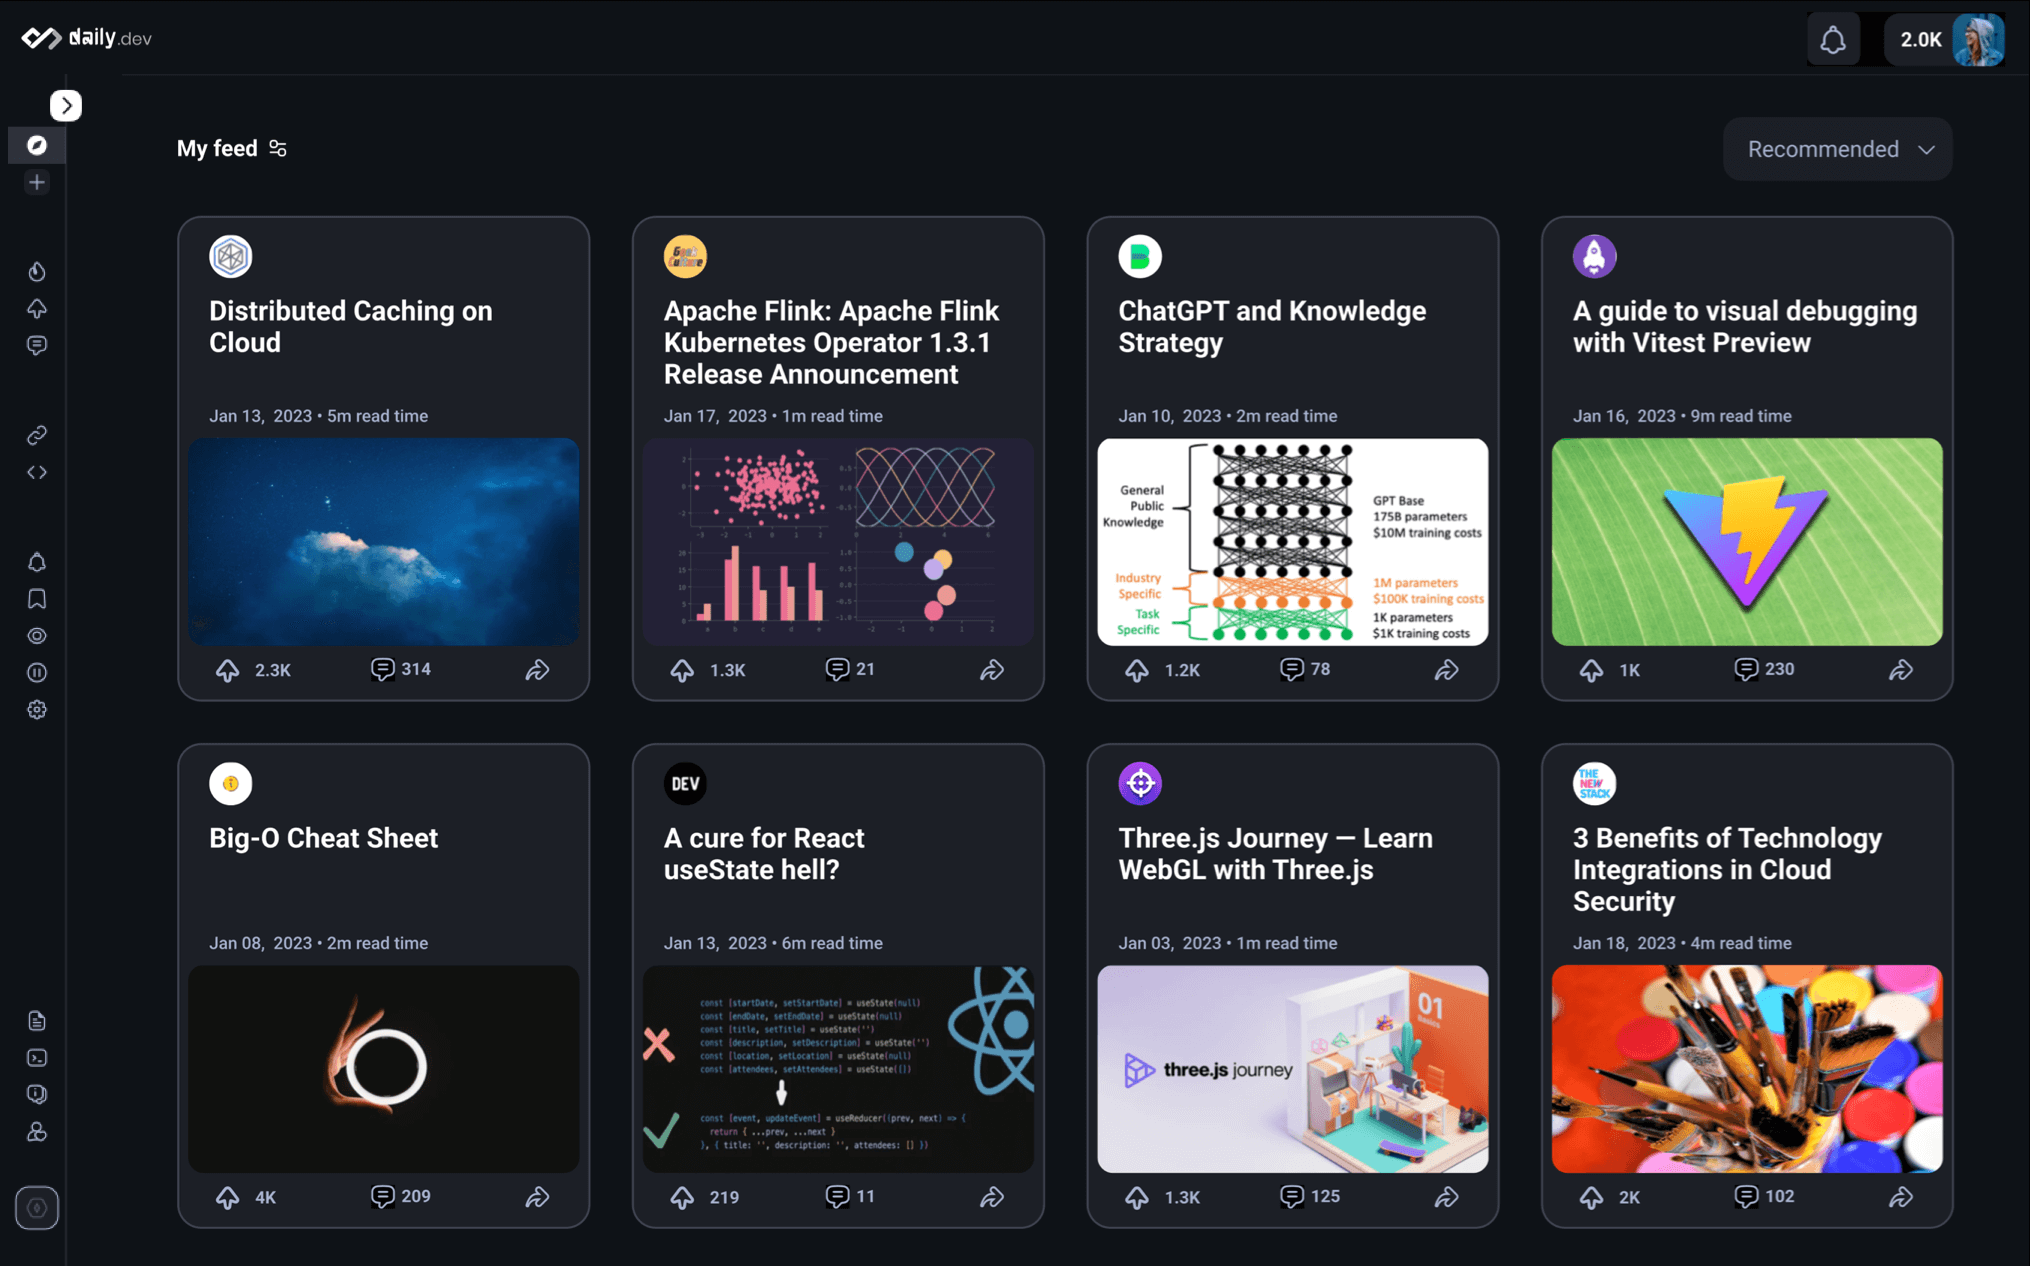 Daily.dev app screenshot of my feed page